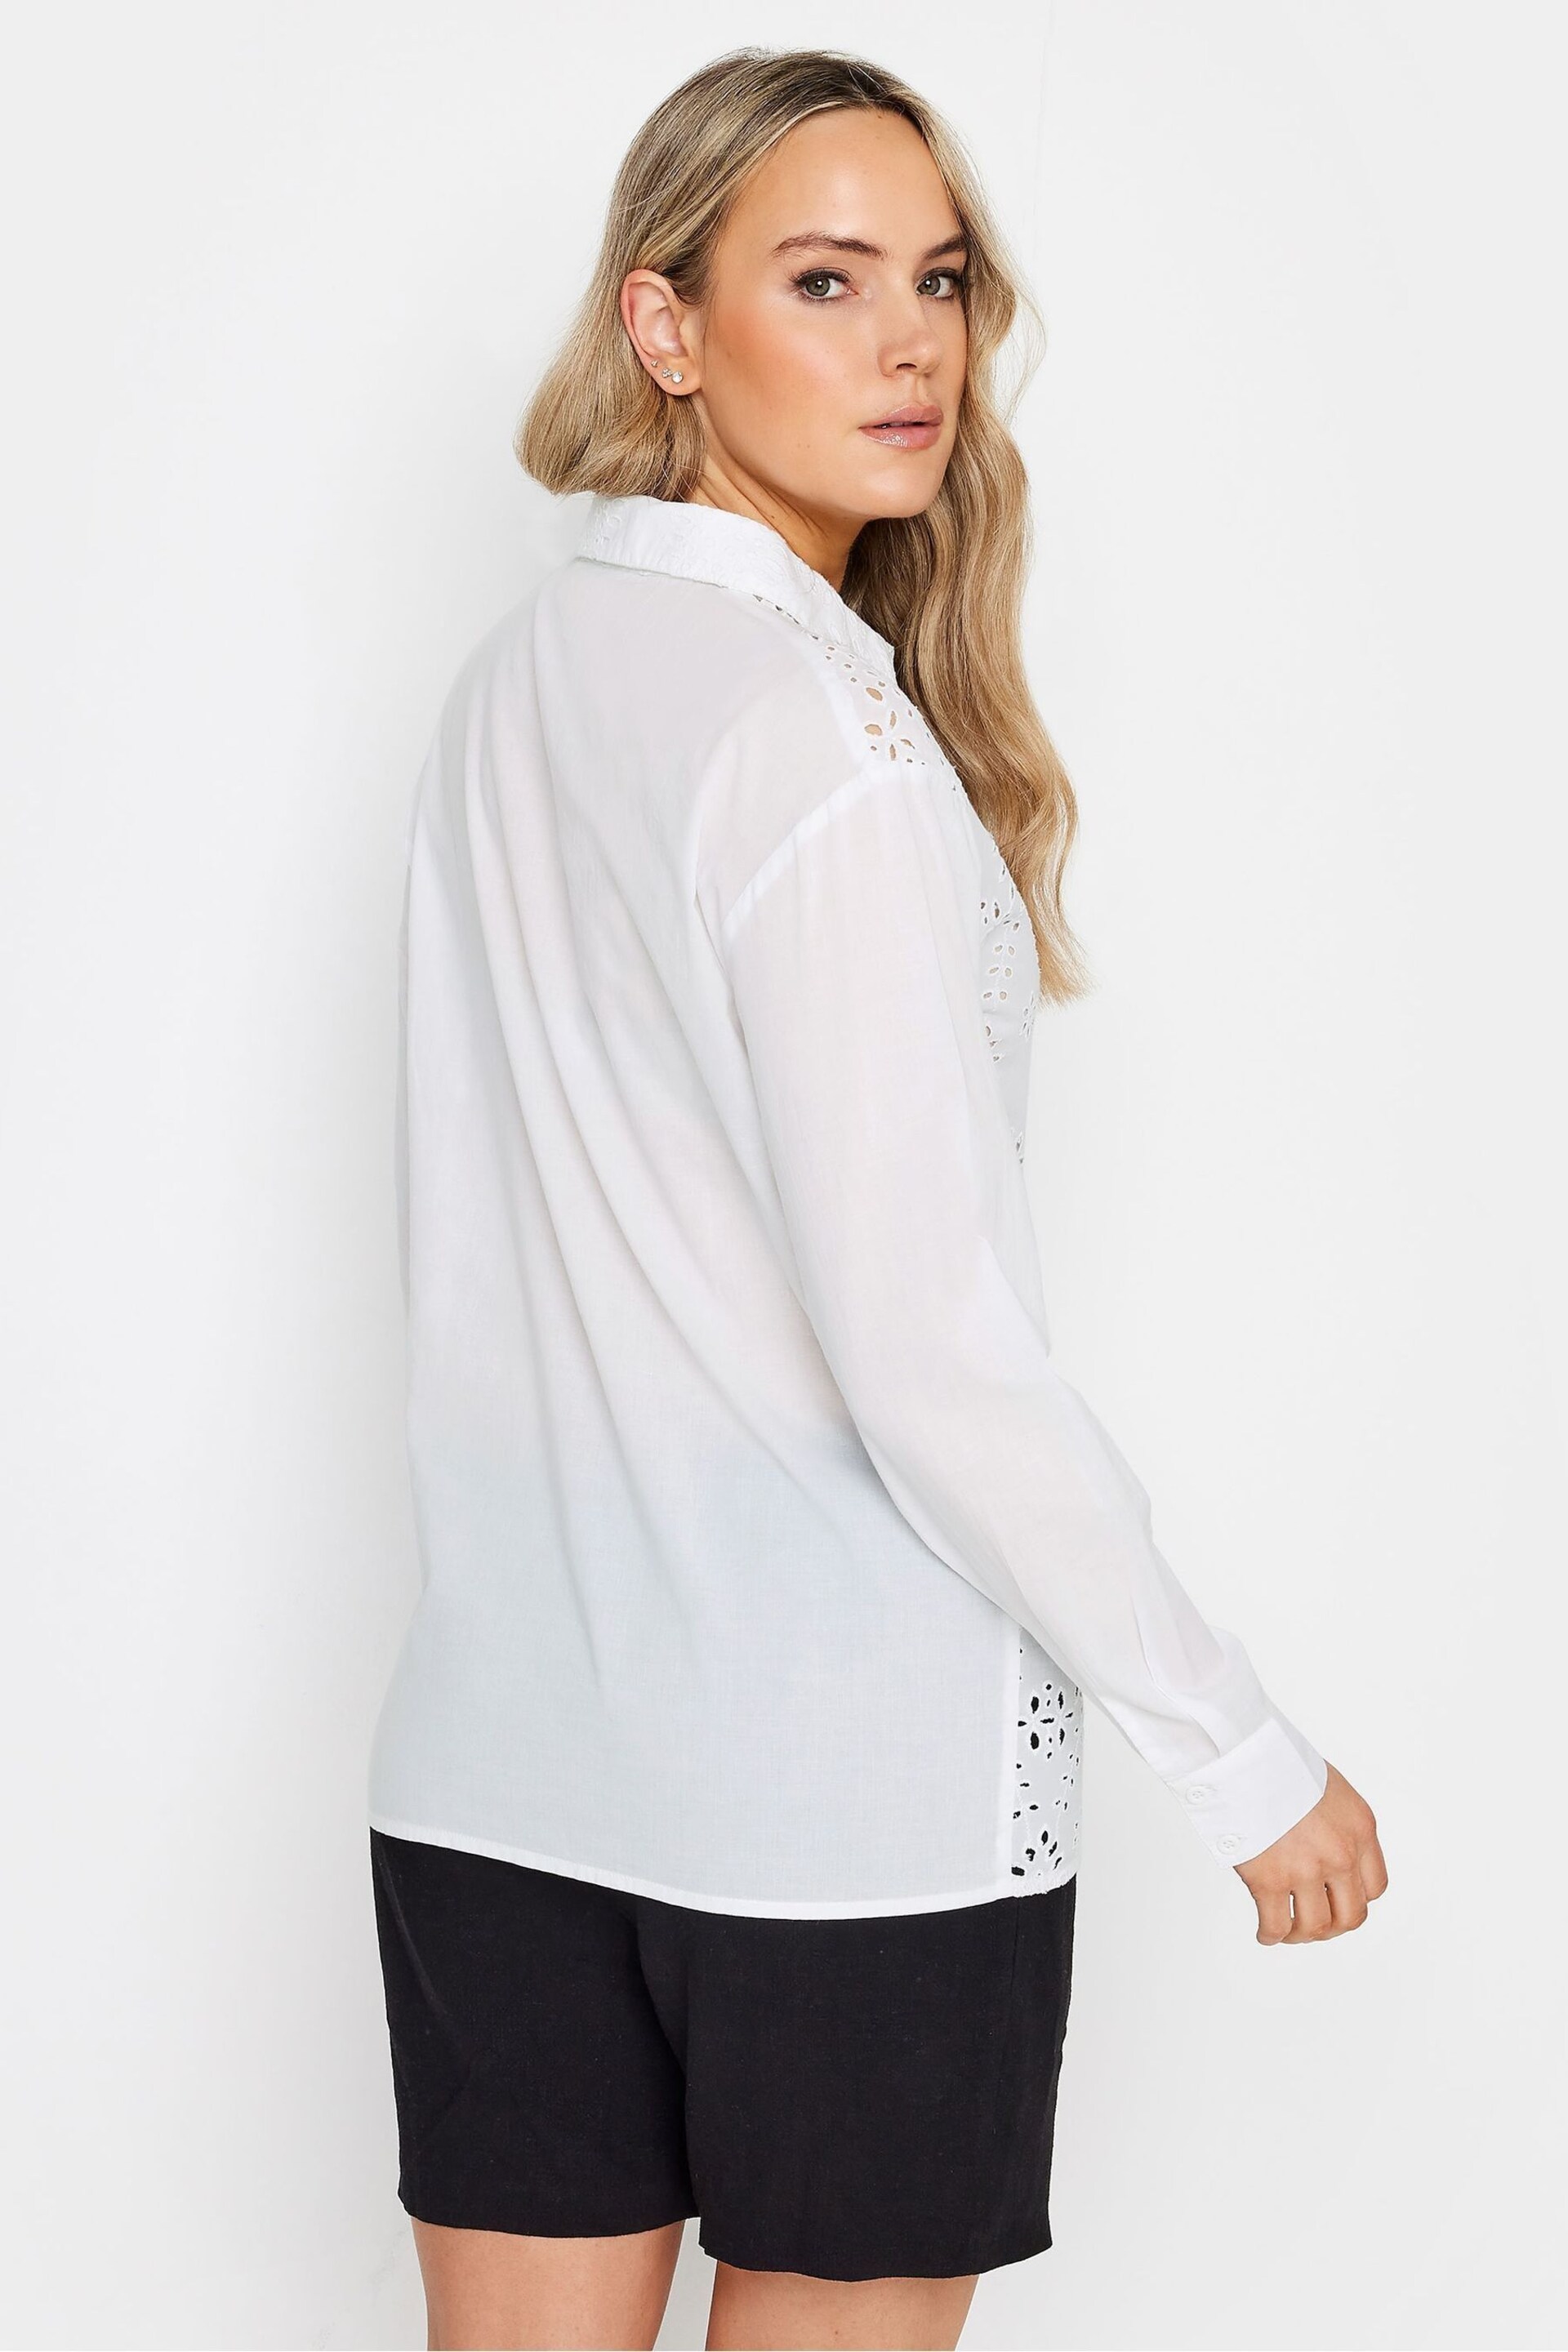 Long Tall Sally White Broderie Long Sleeve Shirt - Image 3 of 4